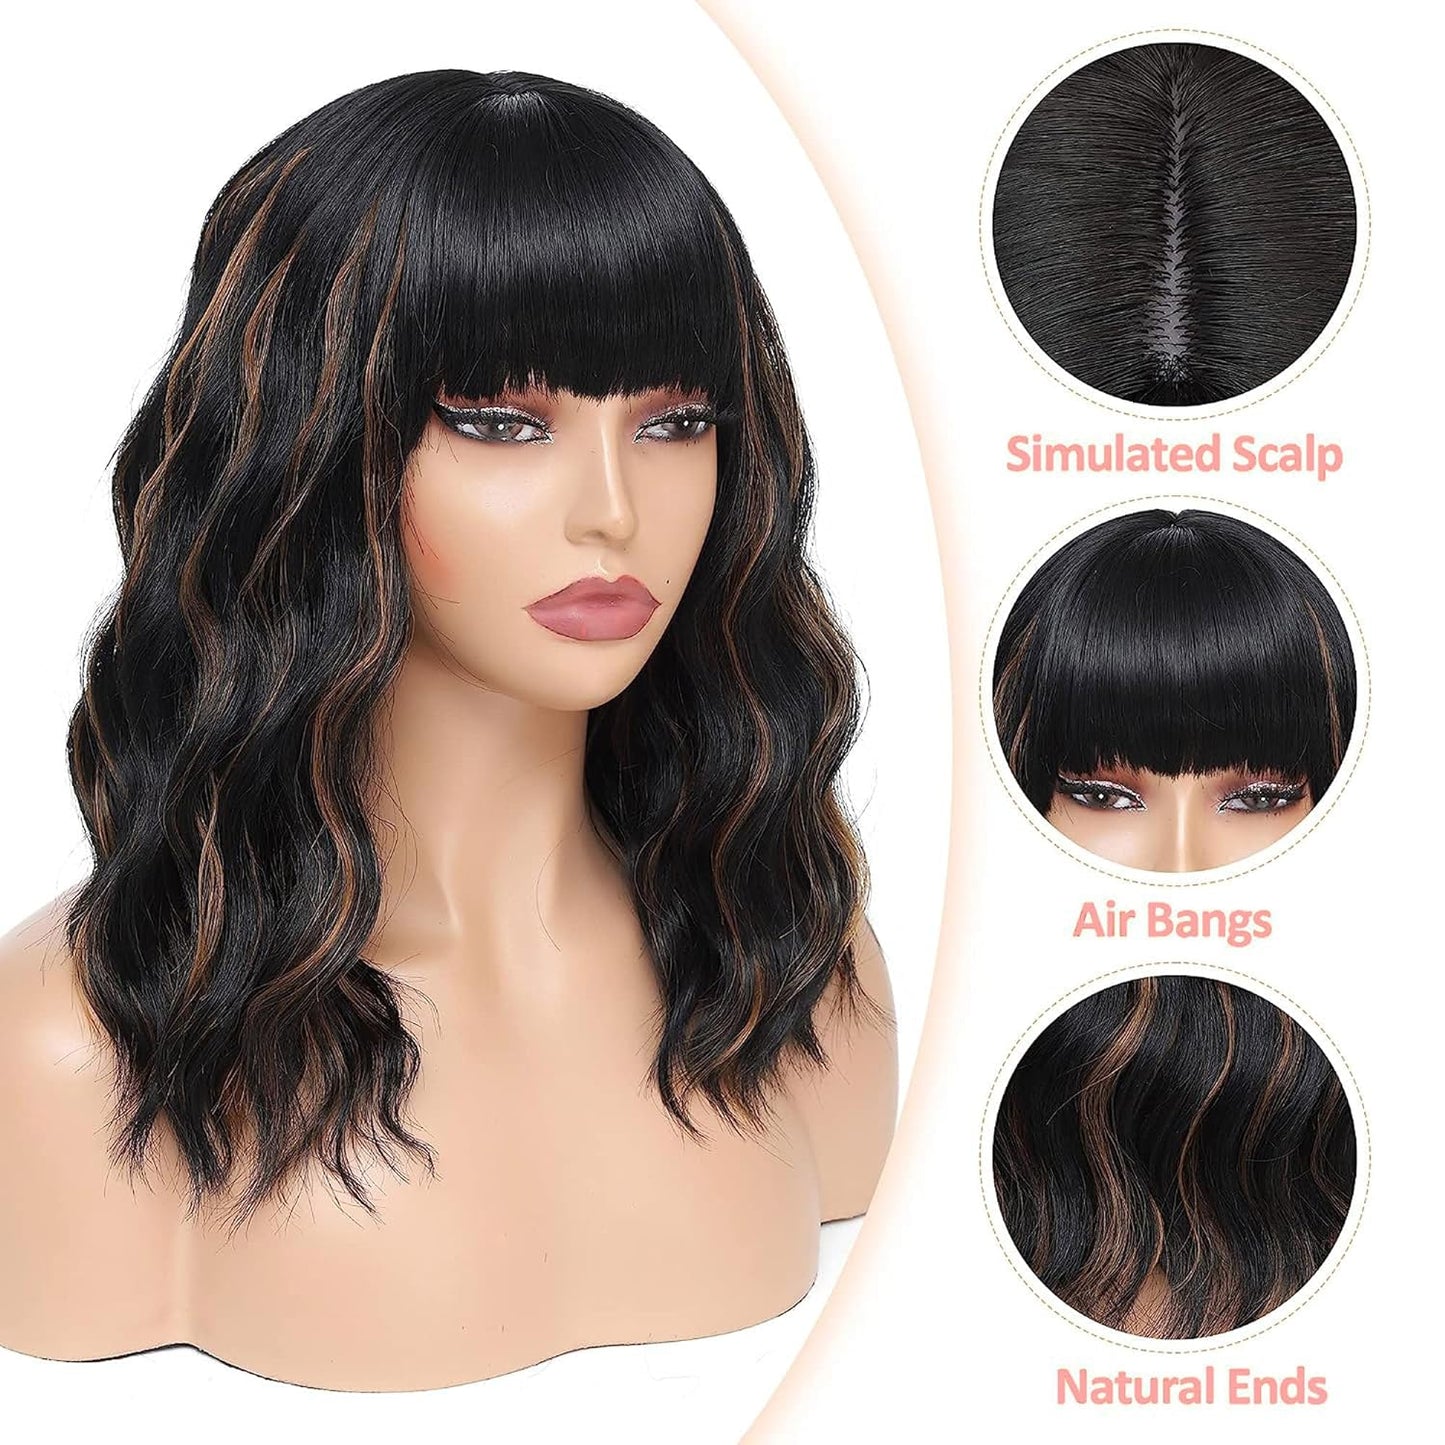 Short Wavy Wig with Bangs Black Mixed Brown Short Bob Wigs Shoulder Length Wear and Go Glueless Wigs Heat Resistant Fiber Synthetic Wig with Bangs